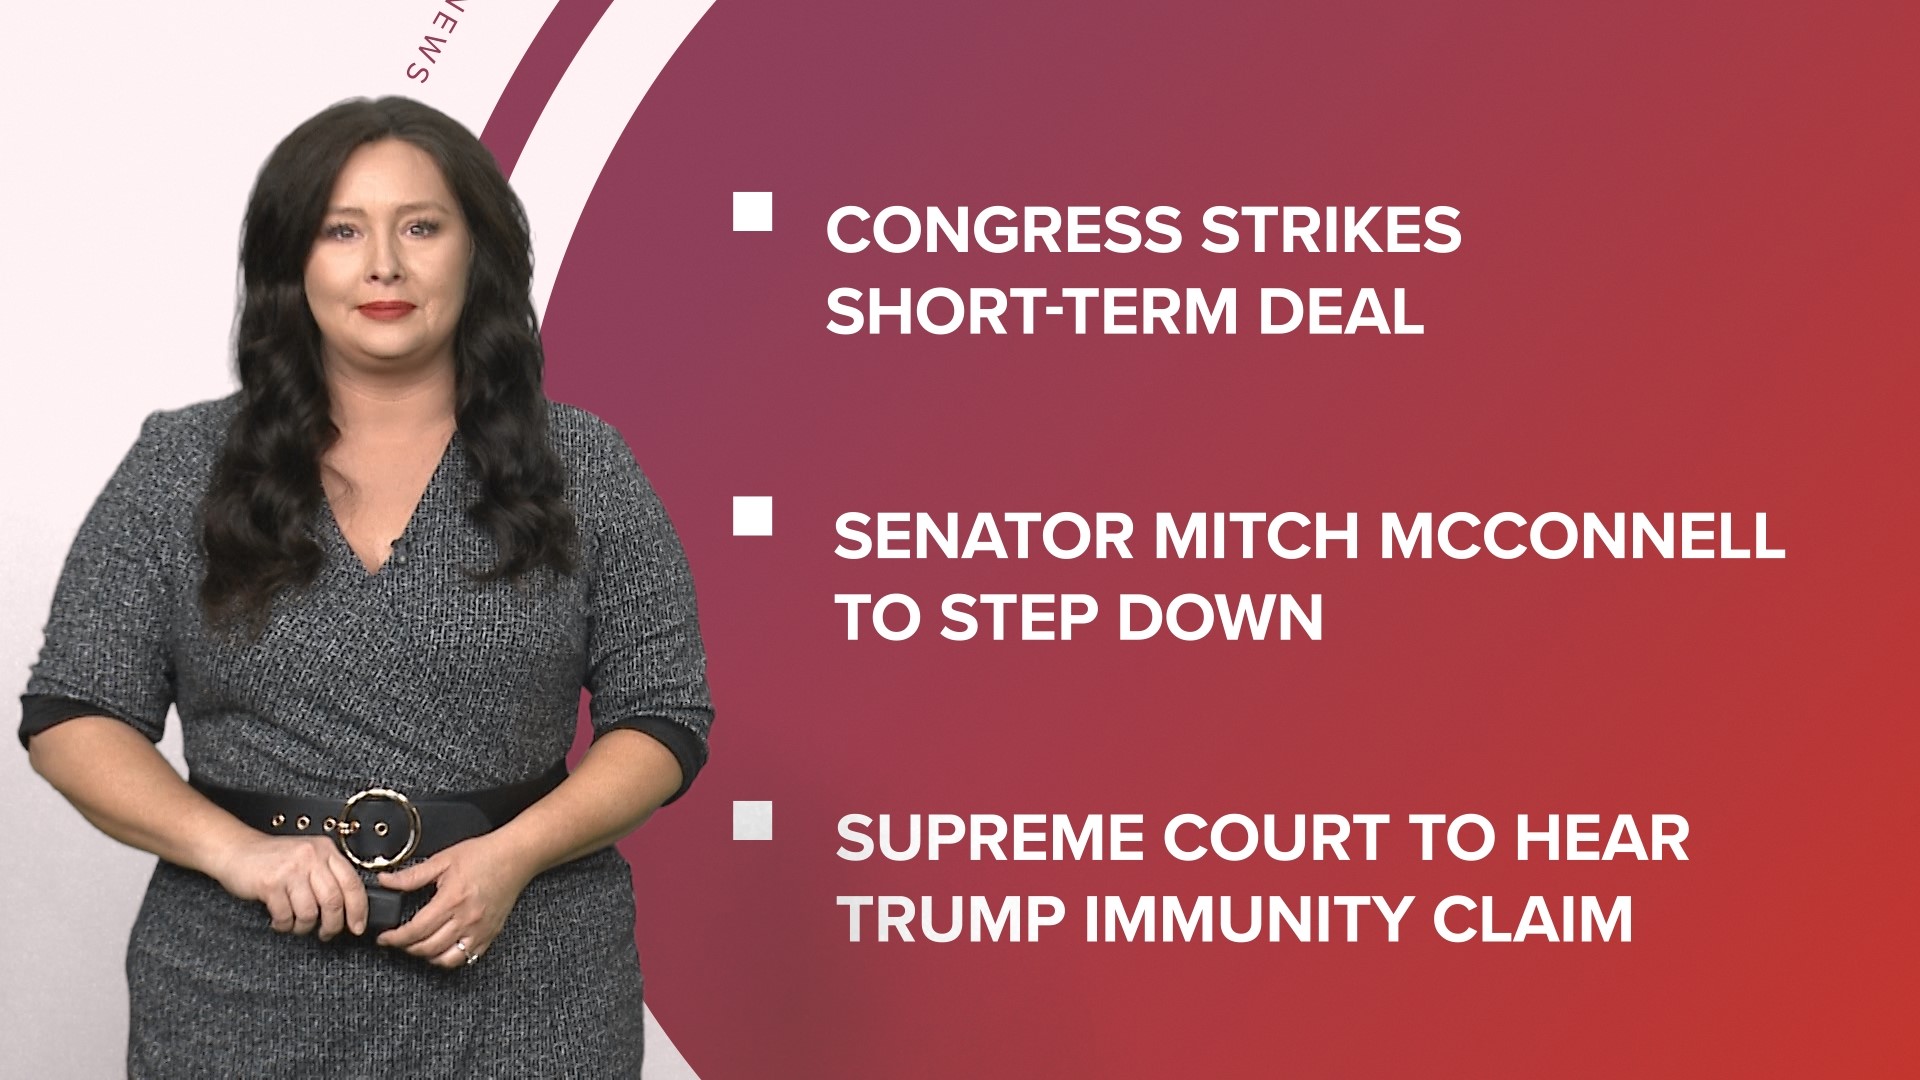 A look at what is happening in the news from the Supreme Court to hear Trump immunity case to Wendy's CEO clarifies pricing changes and leap day history.